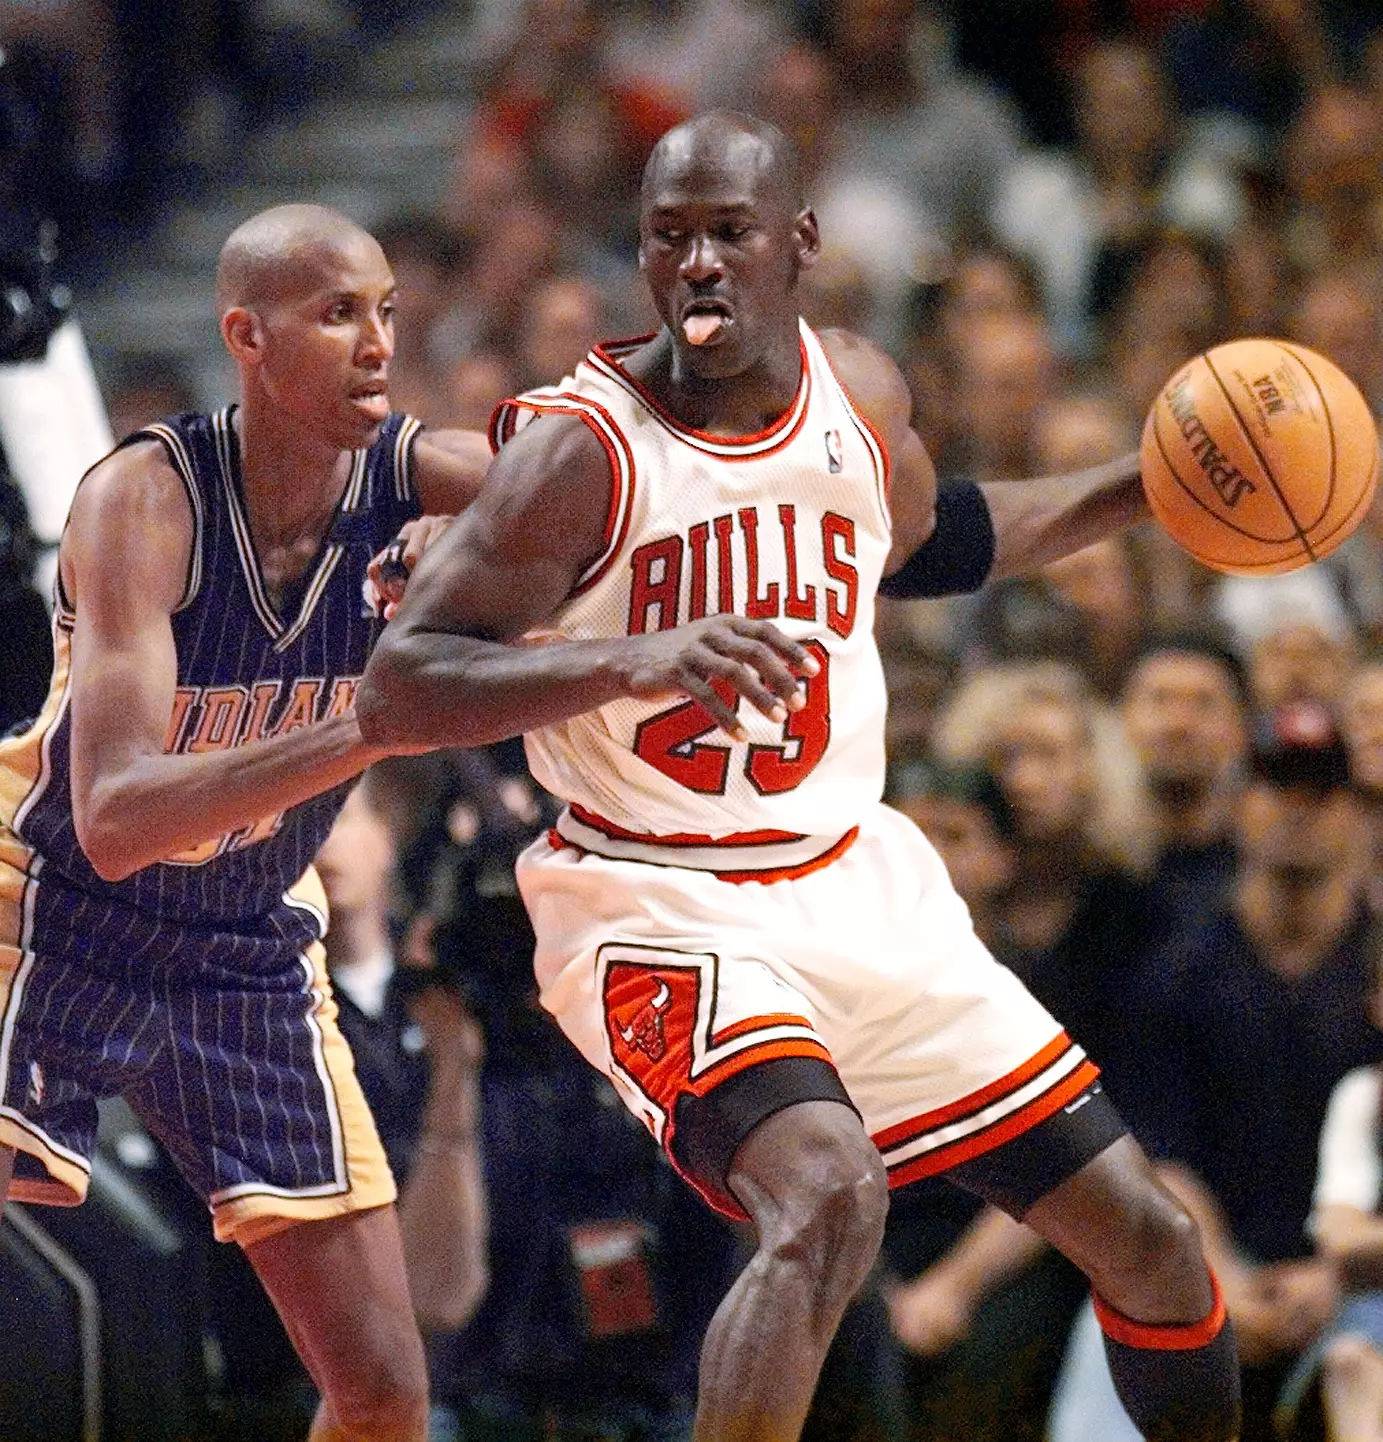 Jordan transcended basketball and is widely regarded as the greatest sports star of all-time.